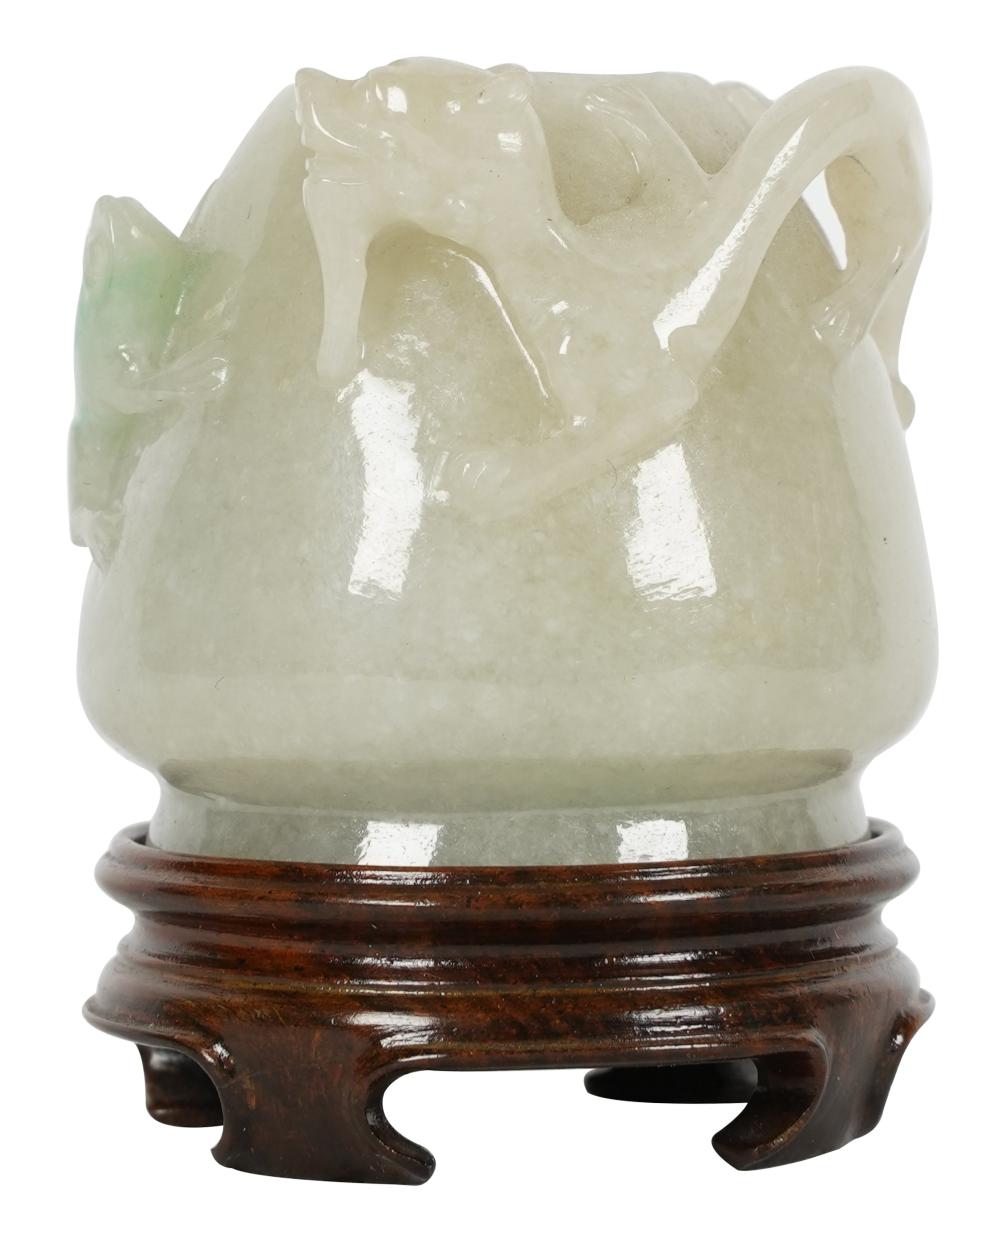 SMALL CHINESE CARVED JADE VASEon 301fea